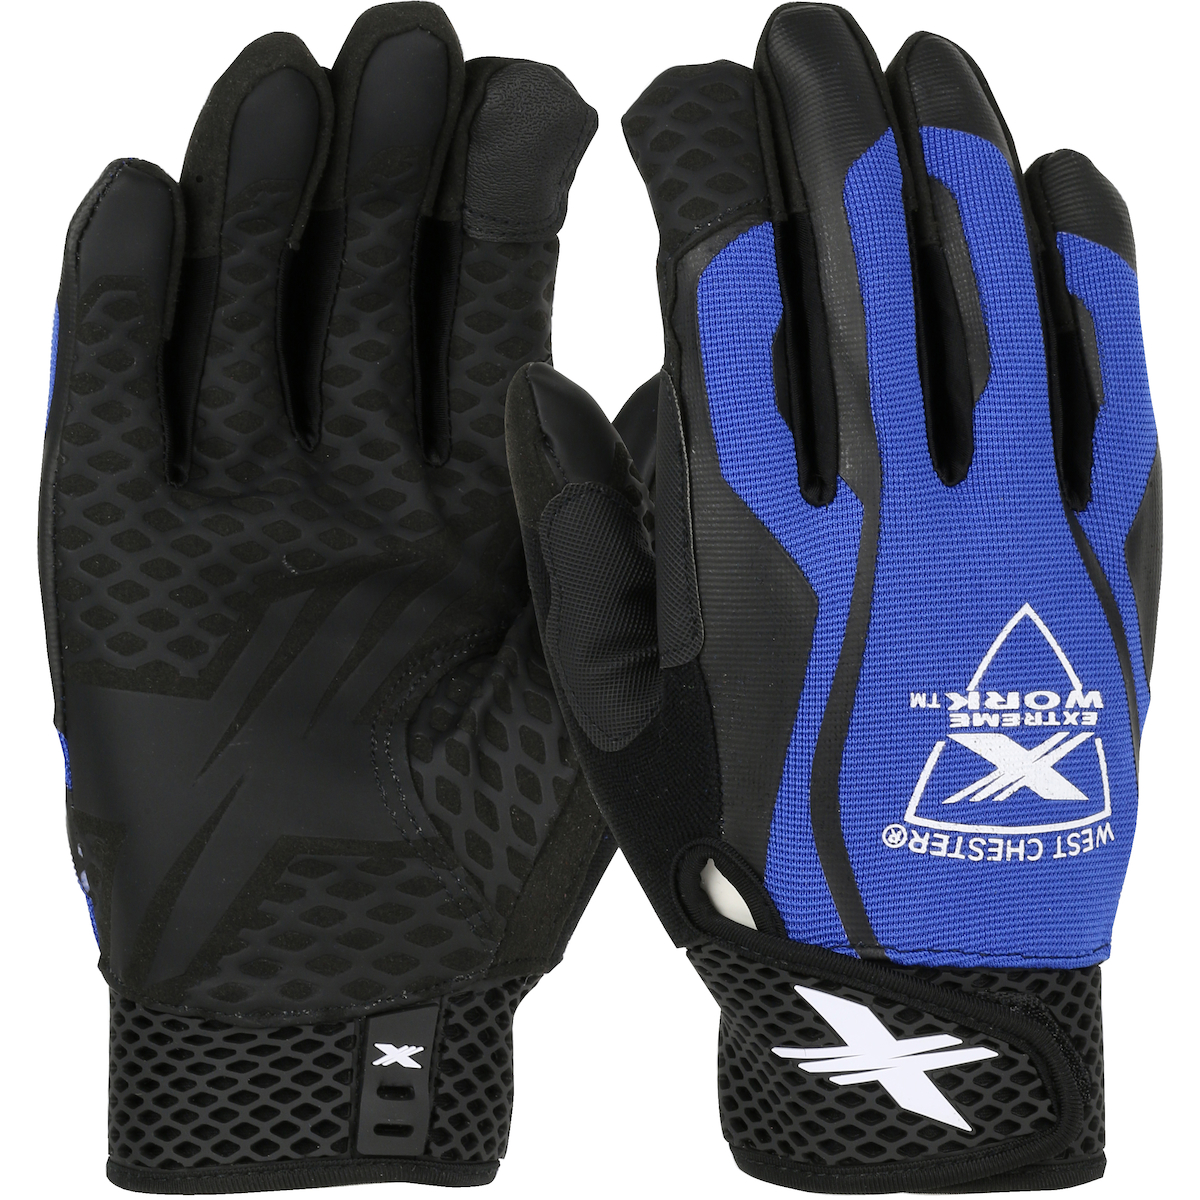 89302 PIP® West Chester Extreme Work® LocX-On™ General Purpose Work Gloves - Blue